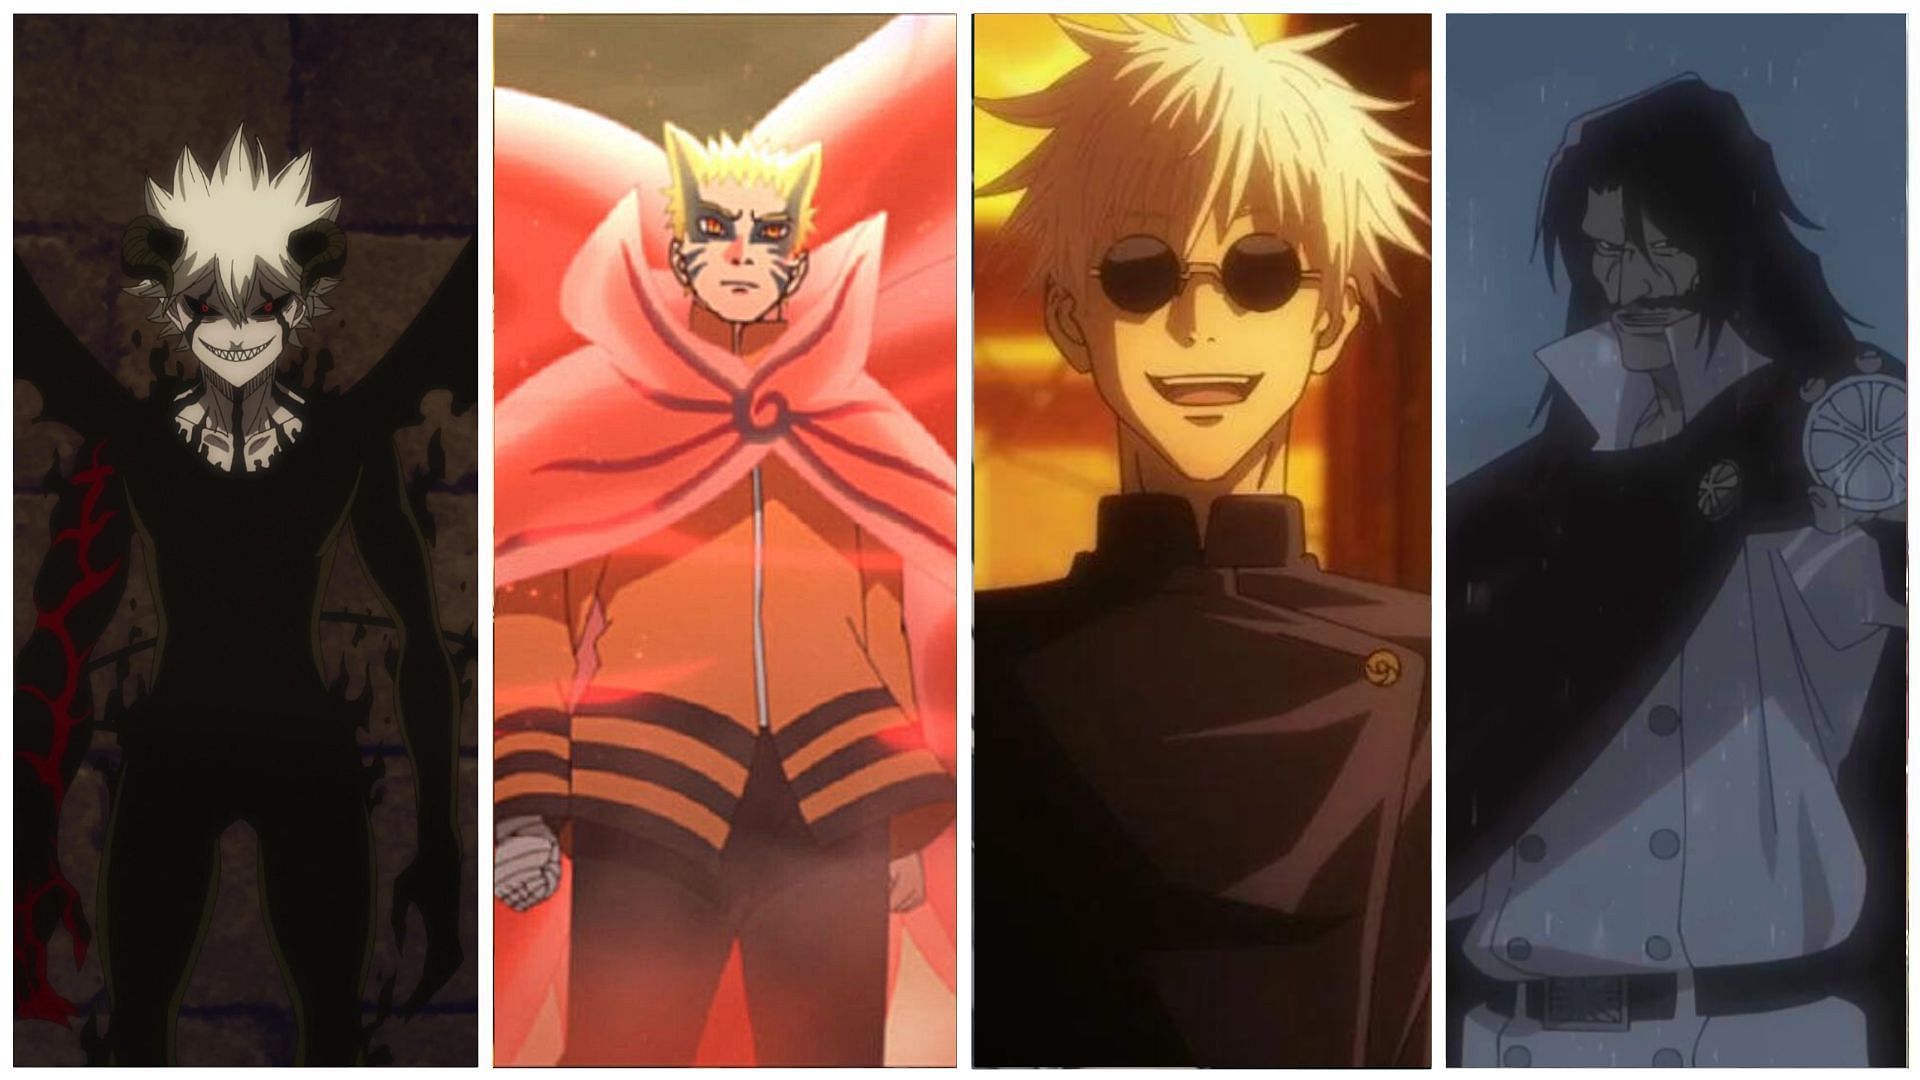 Who is the most intimidating anime character? - Quora